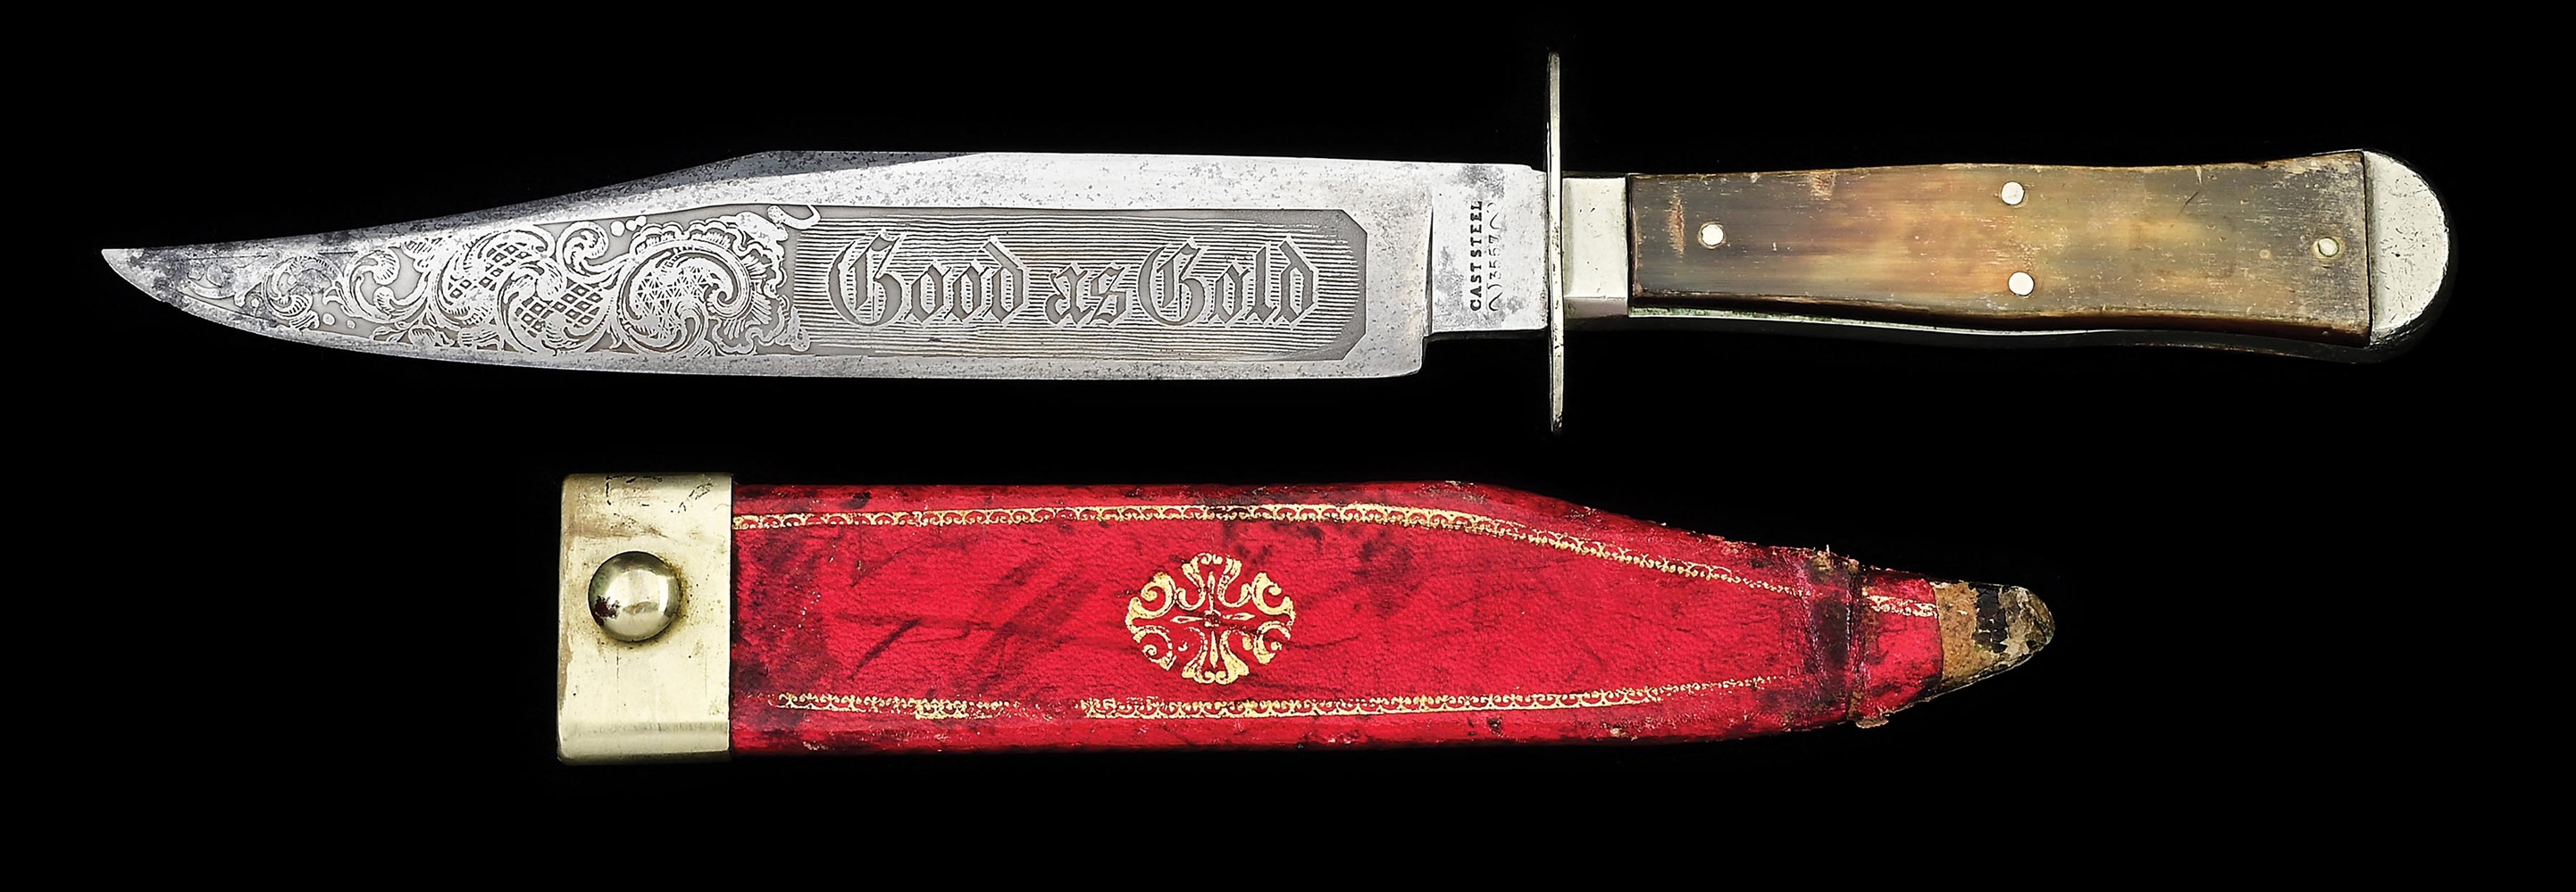 ENGLISH "GOOD AS GOLD" ETCHED BOWIE KNIFE WITH MORROCAN LEATHER SCABBARD.